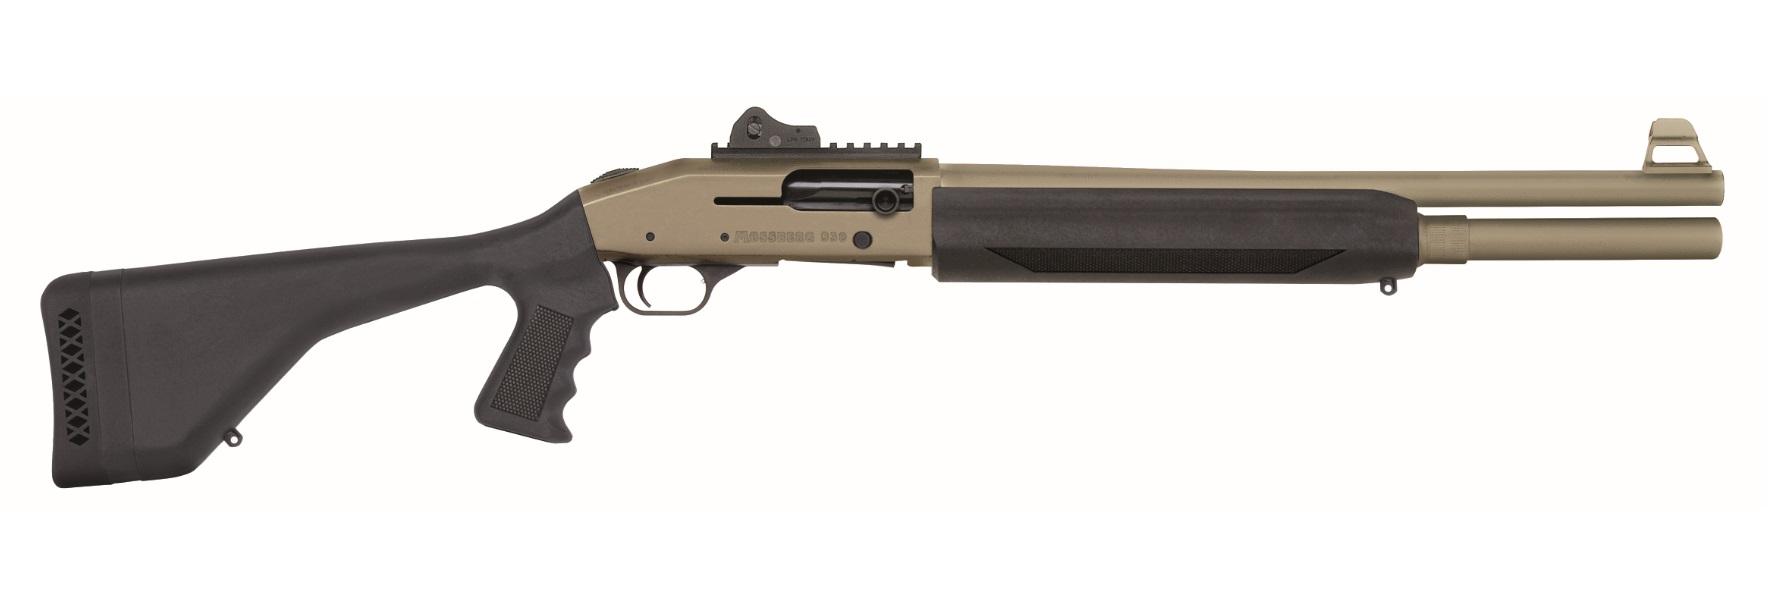 Mossberg 85223 930 SPX 12 Gauge Semi-Auto 3 Inch 71 18.50 Inch Tan Vent Rib Barrel, Tan Drilled  Tapped Steel Receiver, Black Adjustable Synthetic Stock, Black Polymer Grip  | 12GA | 015813852234